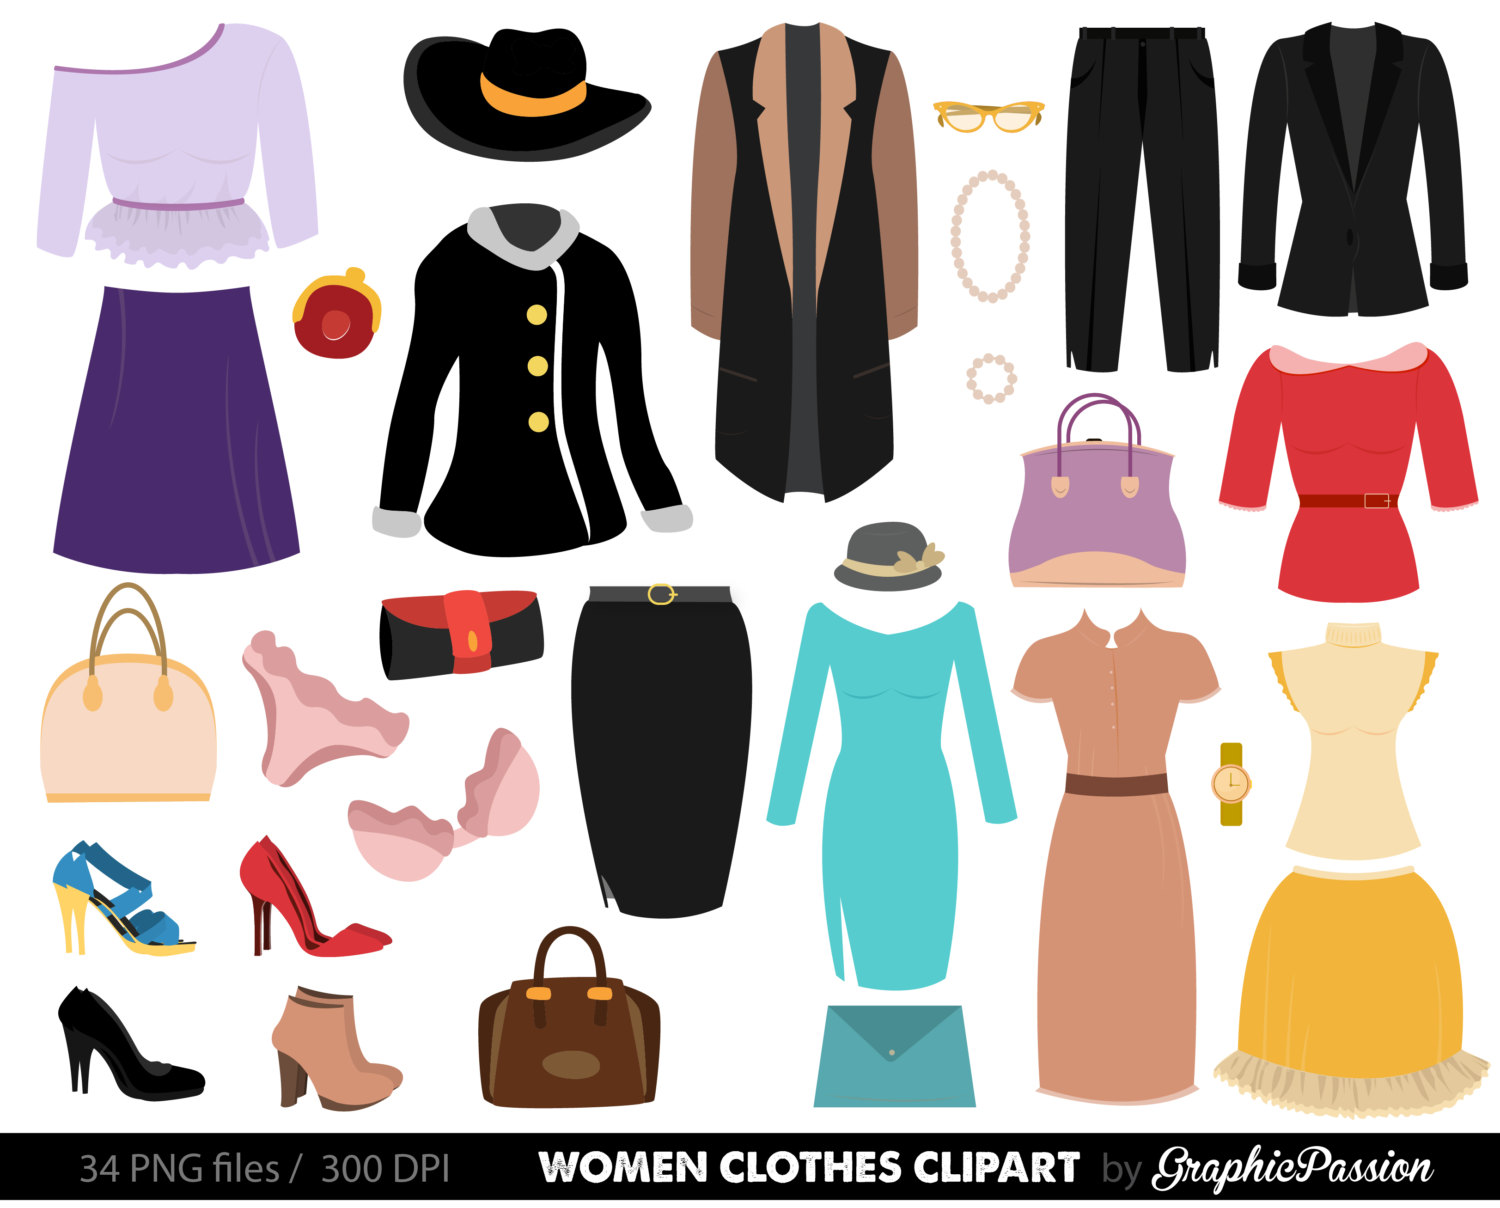 Clothing clipart 